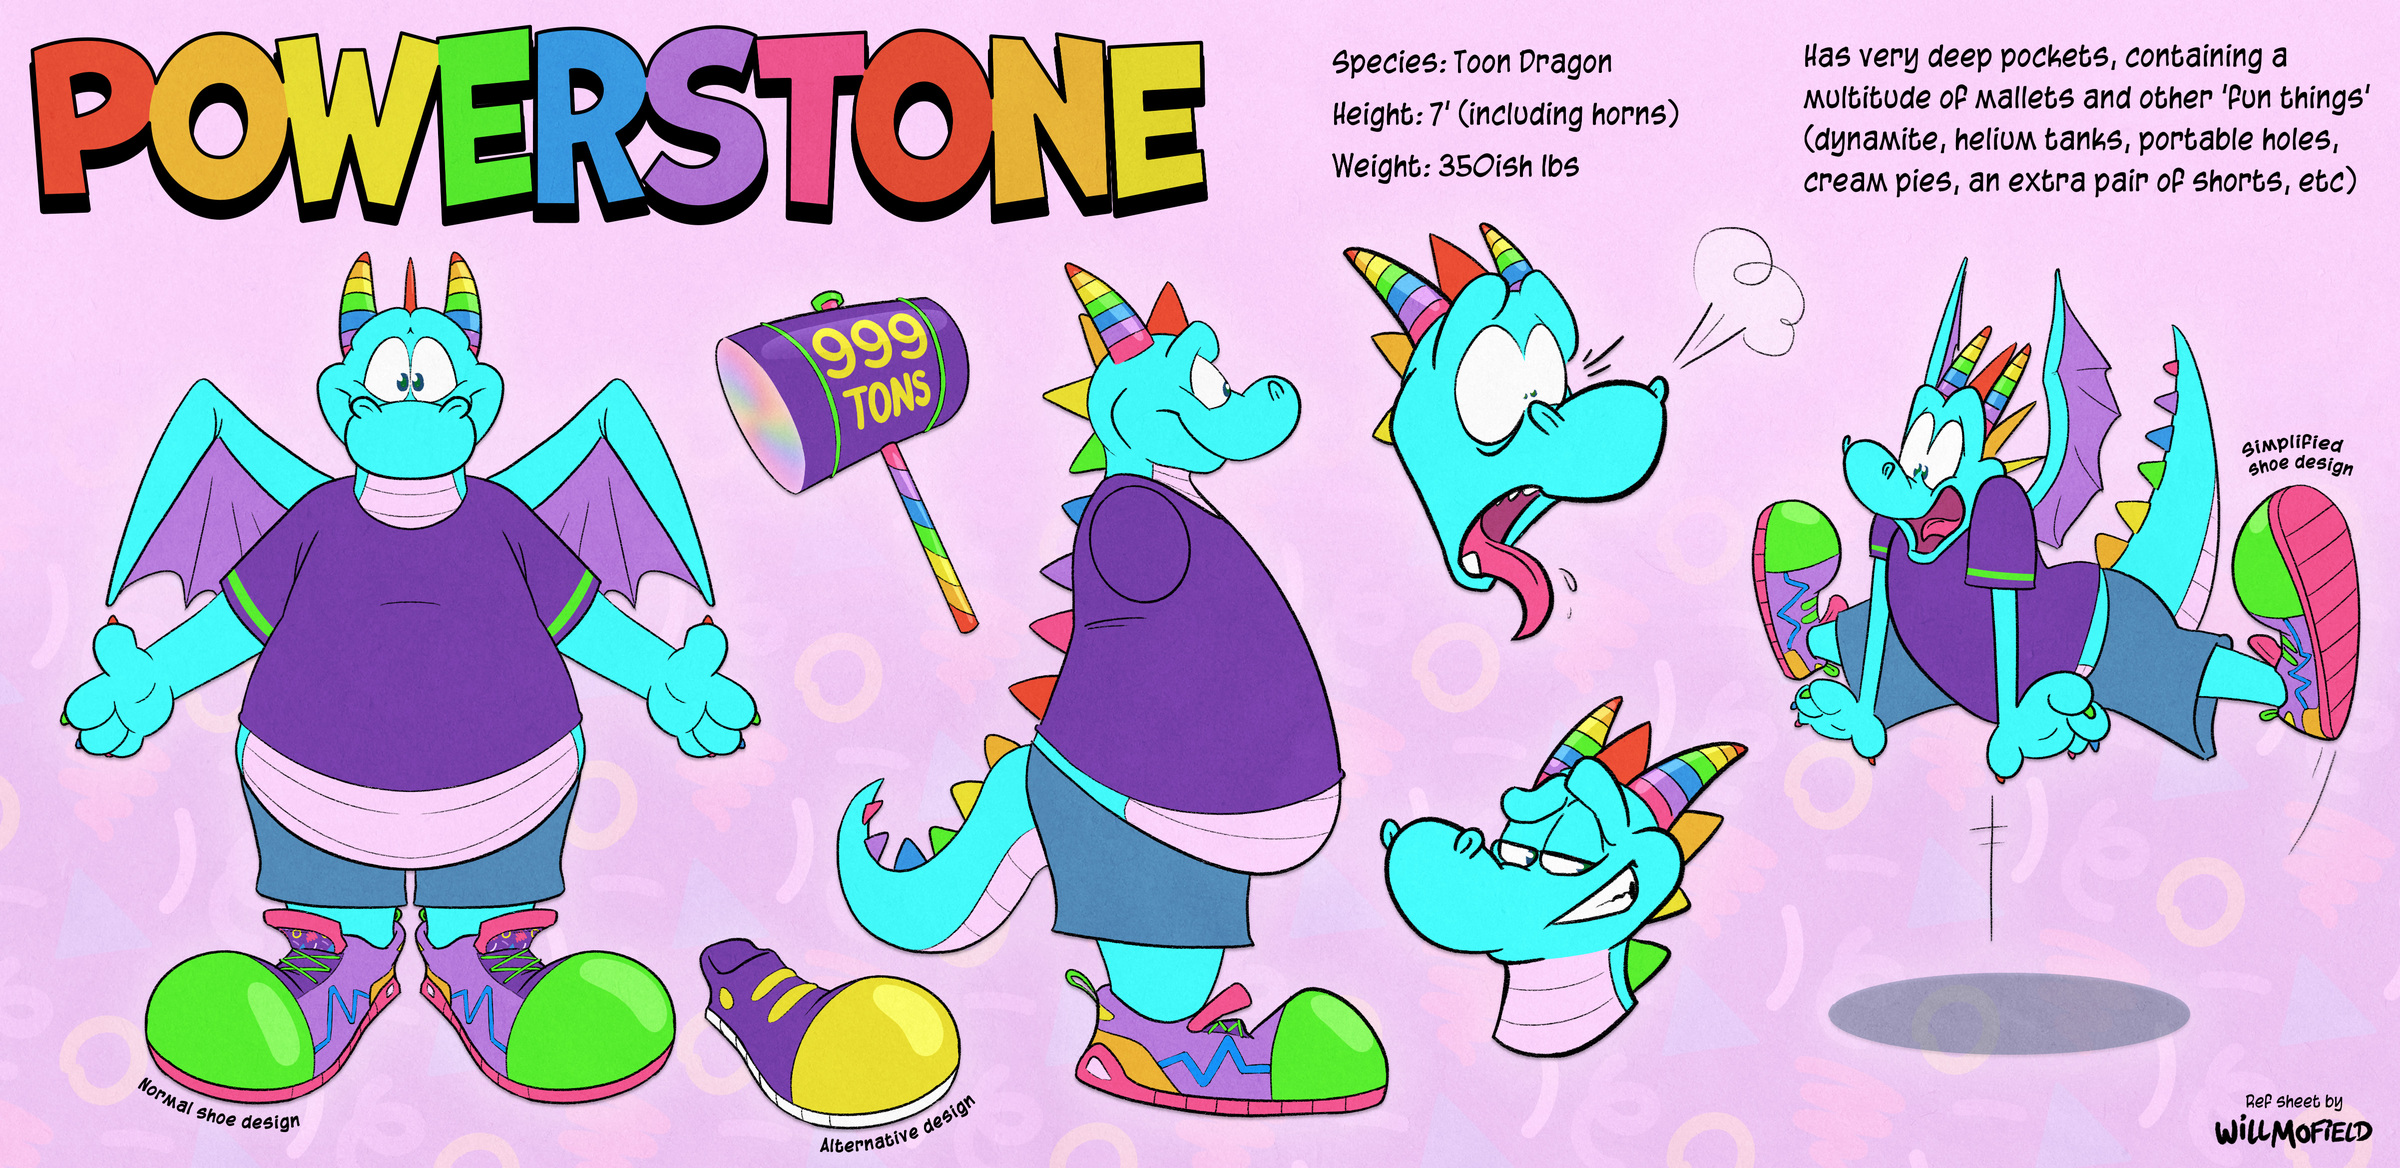 Several drawings of a cyan-coloured cartoon dragon in a t-shirt, shorts and sneakers. The text says:  POWERSTONE Species: Toon Dragon Height: 7' (including horns) Weight: 350ish lbs  Has very deep pockets, containing a multitude of mallets and other 'fun things' (dynamite, helium tanks, portable holes, cream pies, an extra pair of shorts, etc)